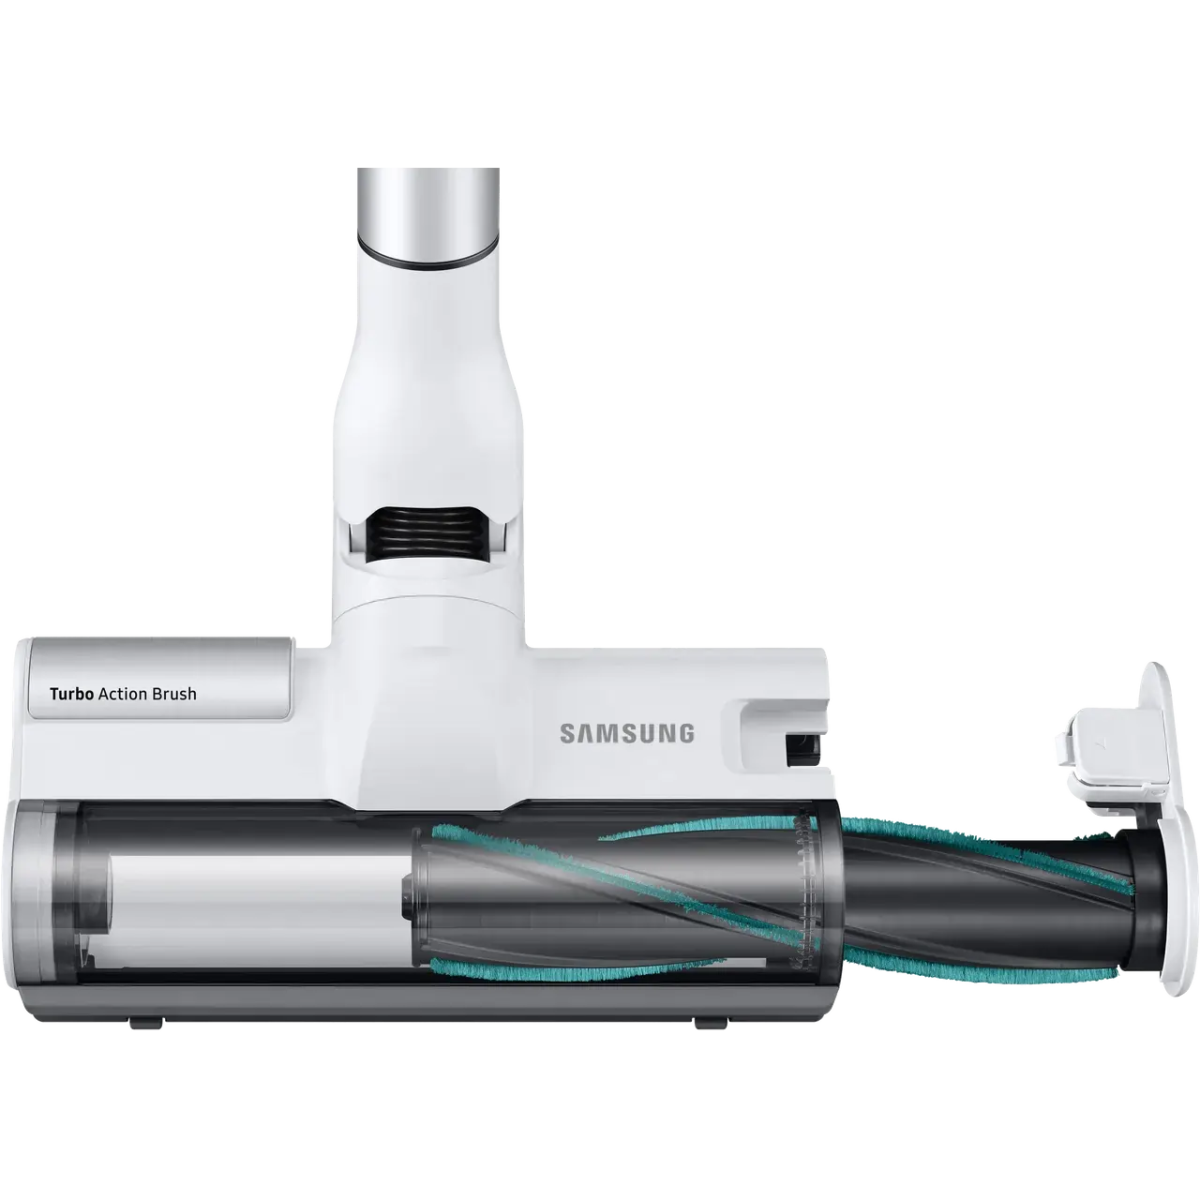 Samsung Jet™ 70 Pet VS15T7032R1 Cordless Vacuum Cleaner with up to 40 Minutes Run Time - White / Green - Atlantic Electrics